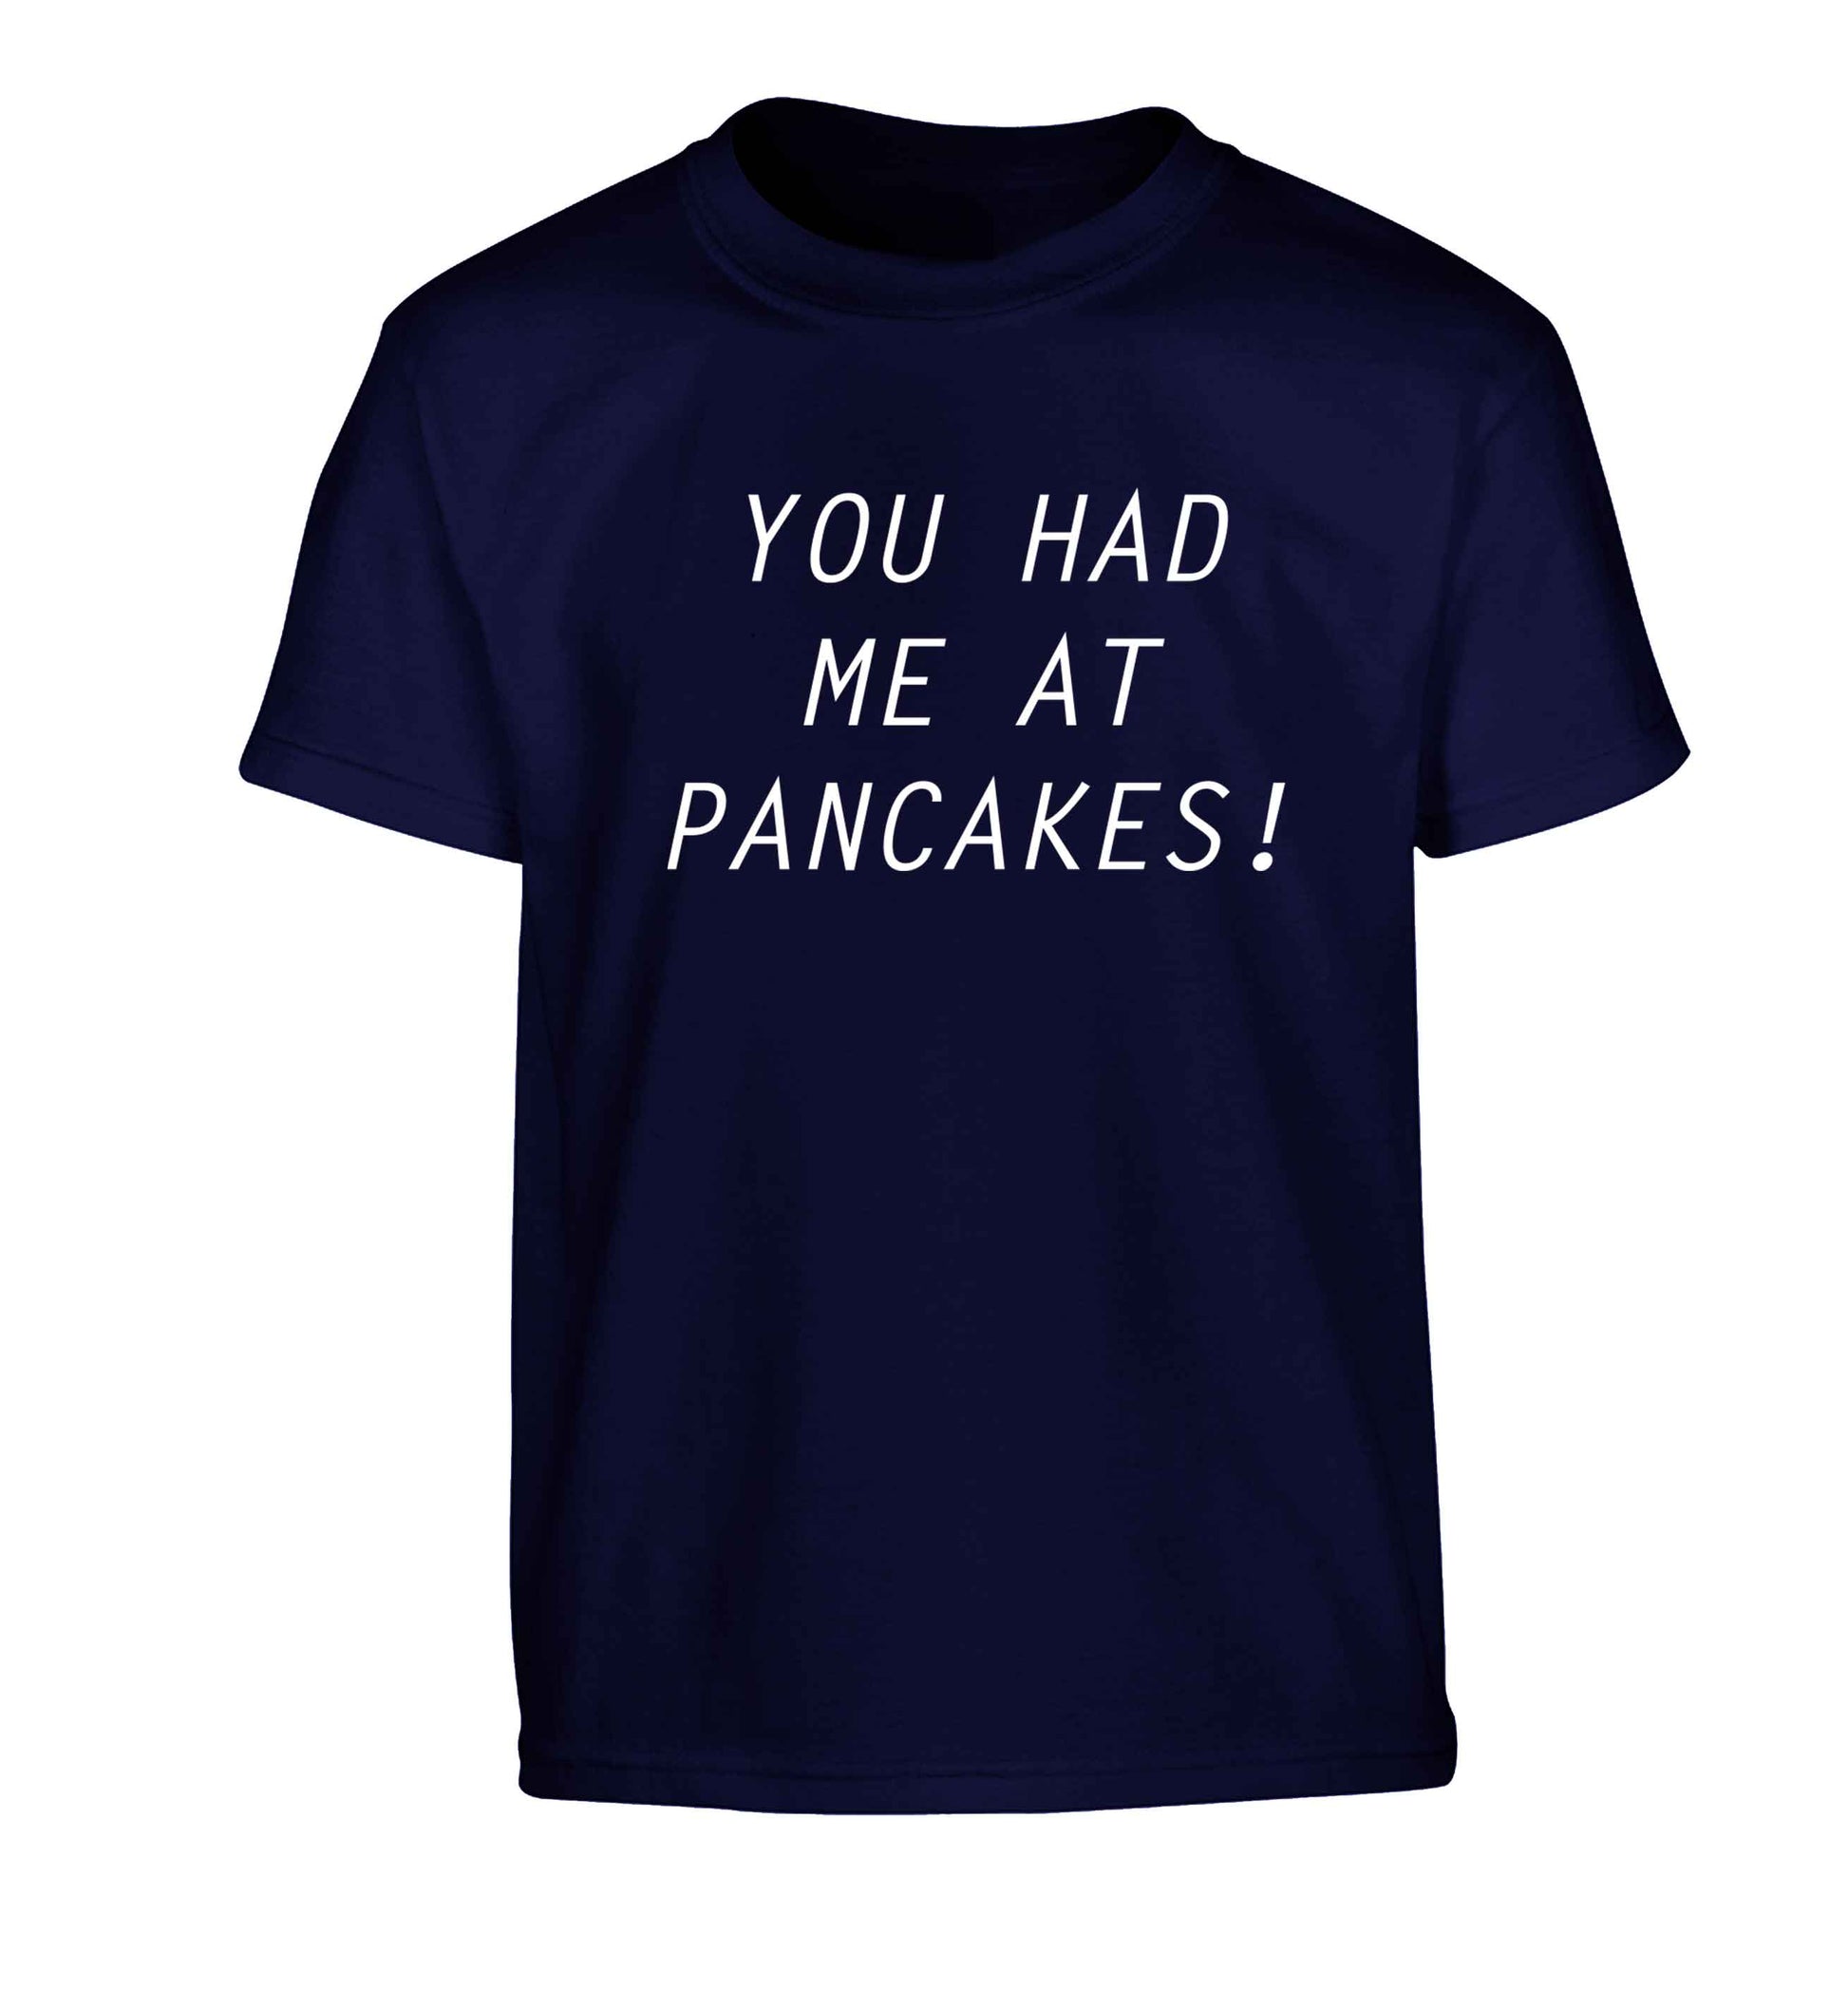 You had me at pancakes Children's navy Tshirt 12-13 Years